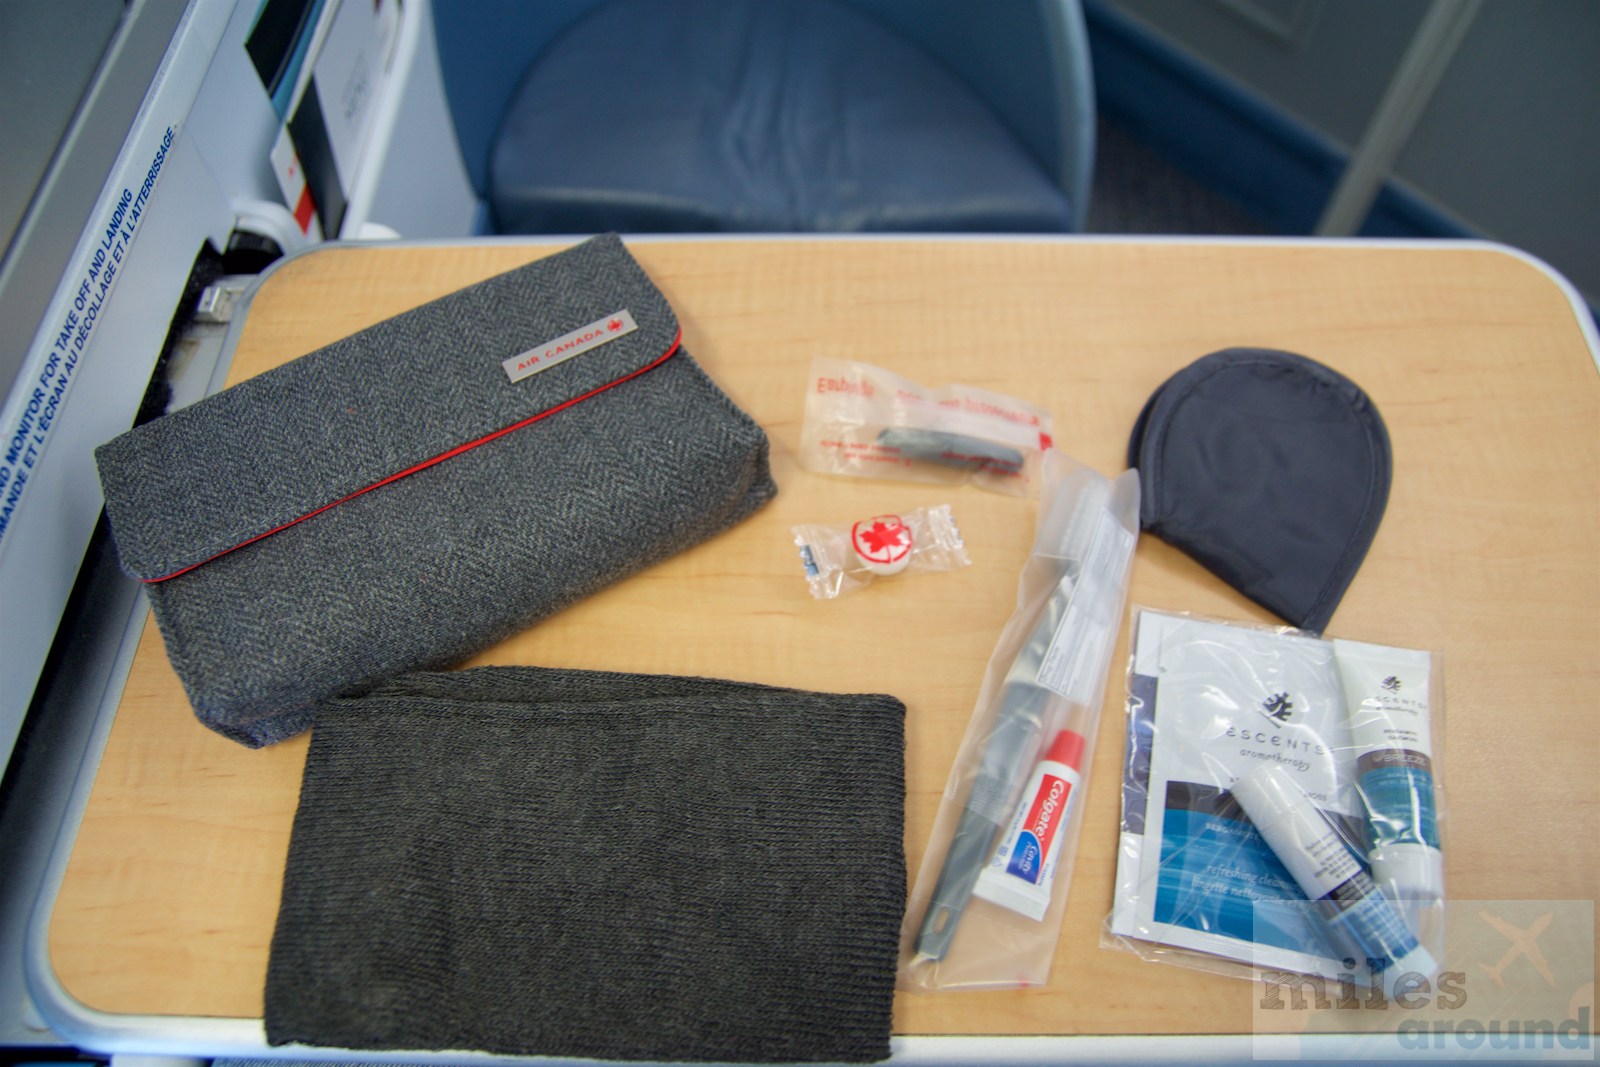 Air Canada Airbus A330 300 Business class cabin inflight amenity kits @milesaround